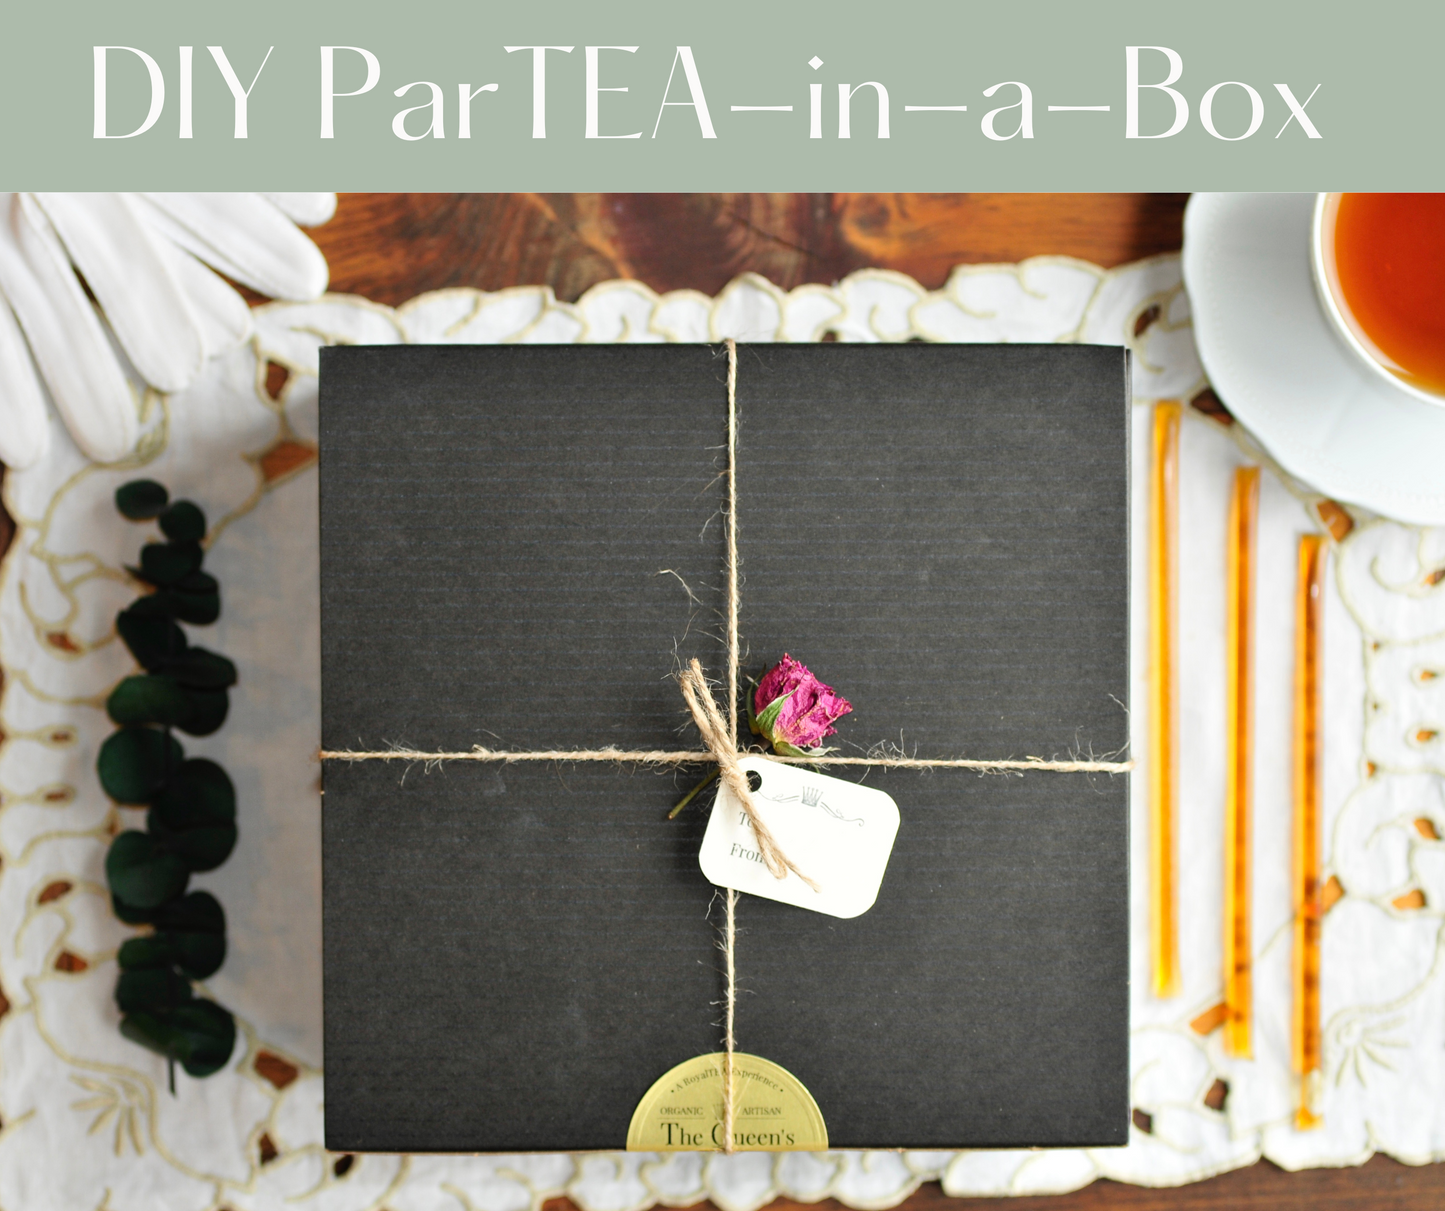 ParTEA-in-a-Box | DIY Tea Kit for 20 people